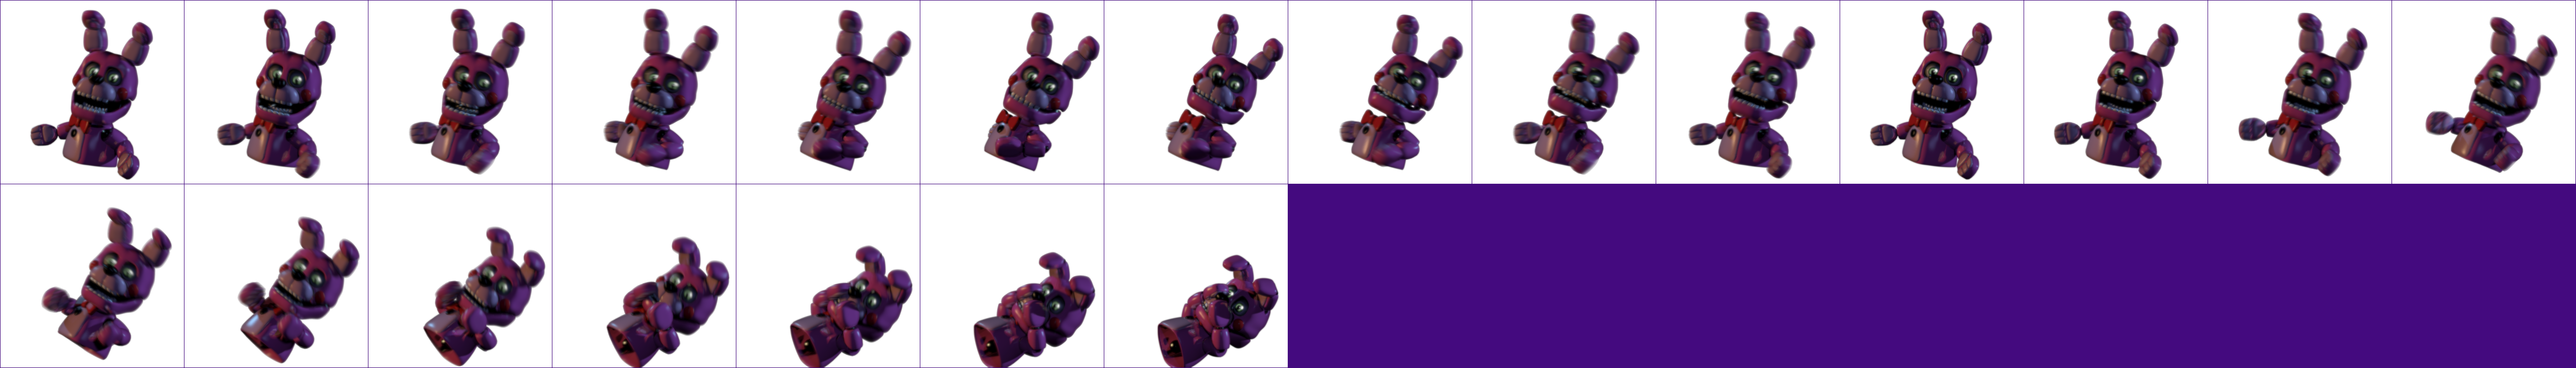 Five Nights at Freddy's: Sister Location - Bonnet